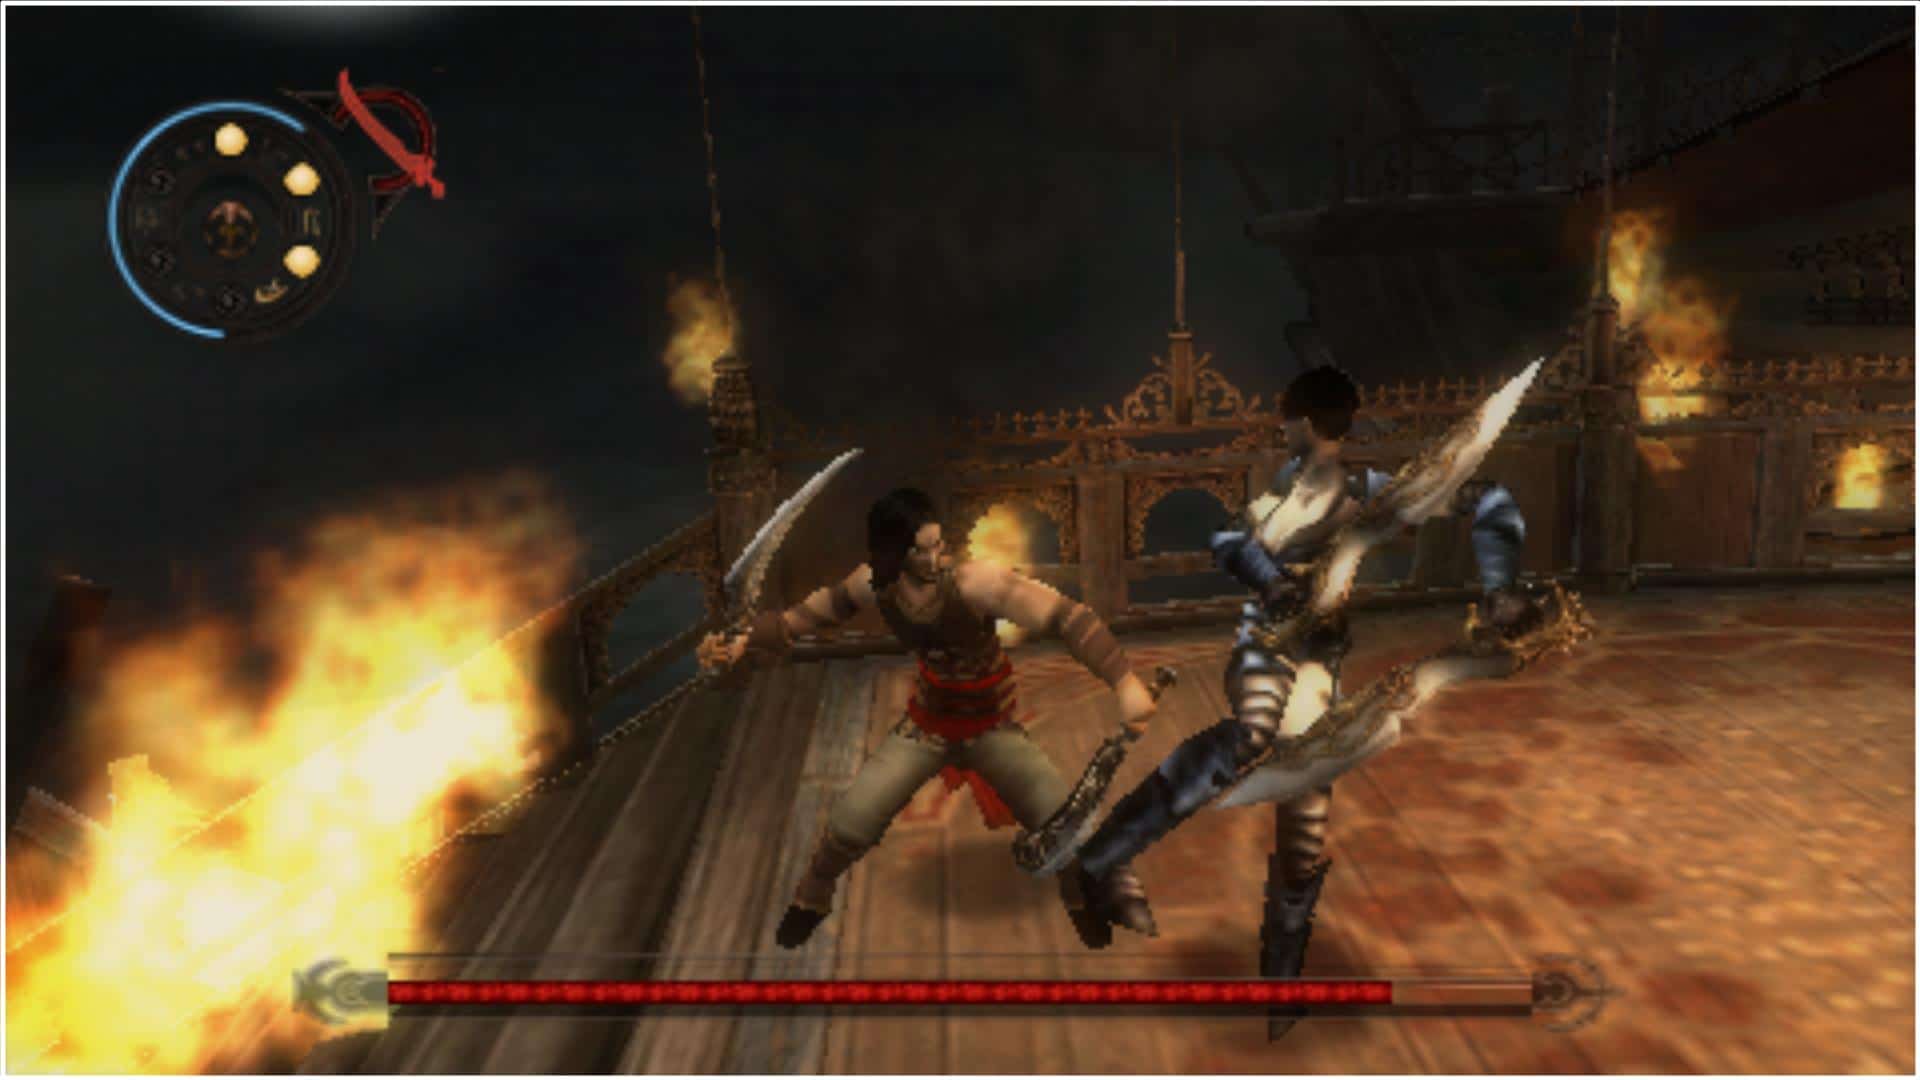 PSP] Prince of Persia - Revelations (USA) (En,Fr,Es) : Ubisoft  Divertissements Inc. : Free Download, Borrow, and Streaming : Internet  Archive